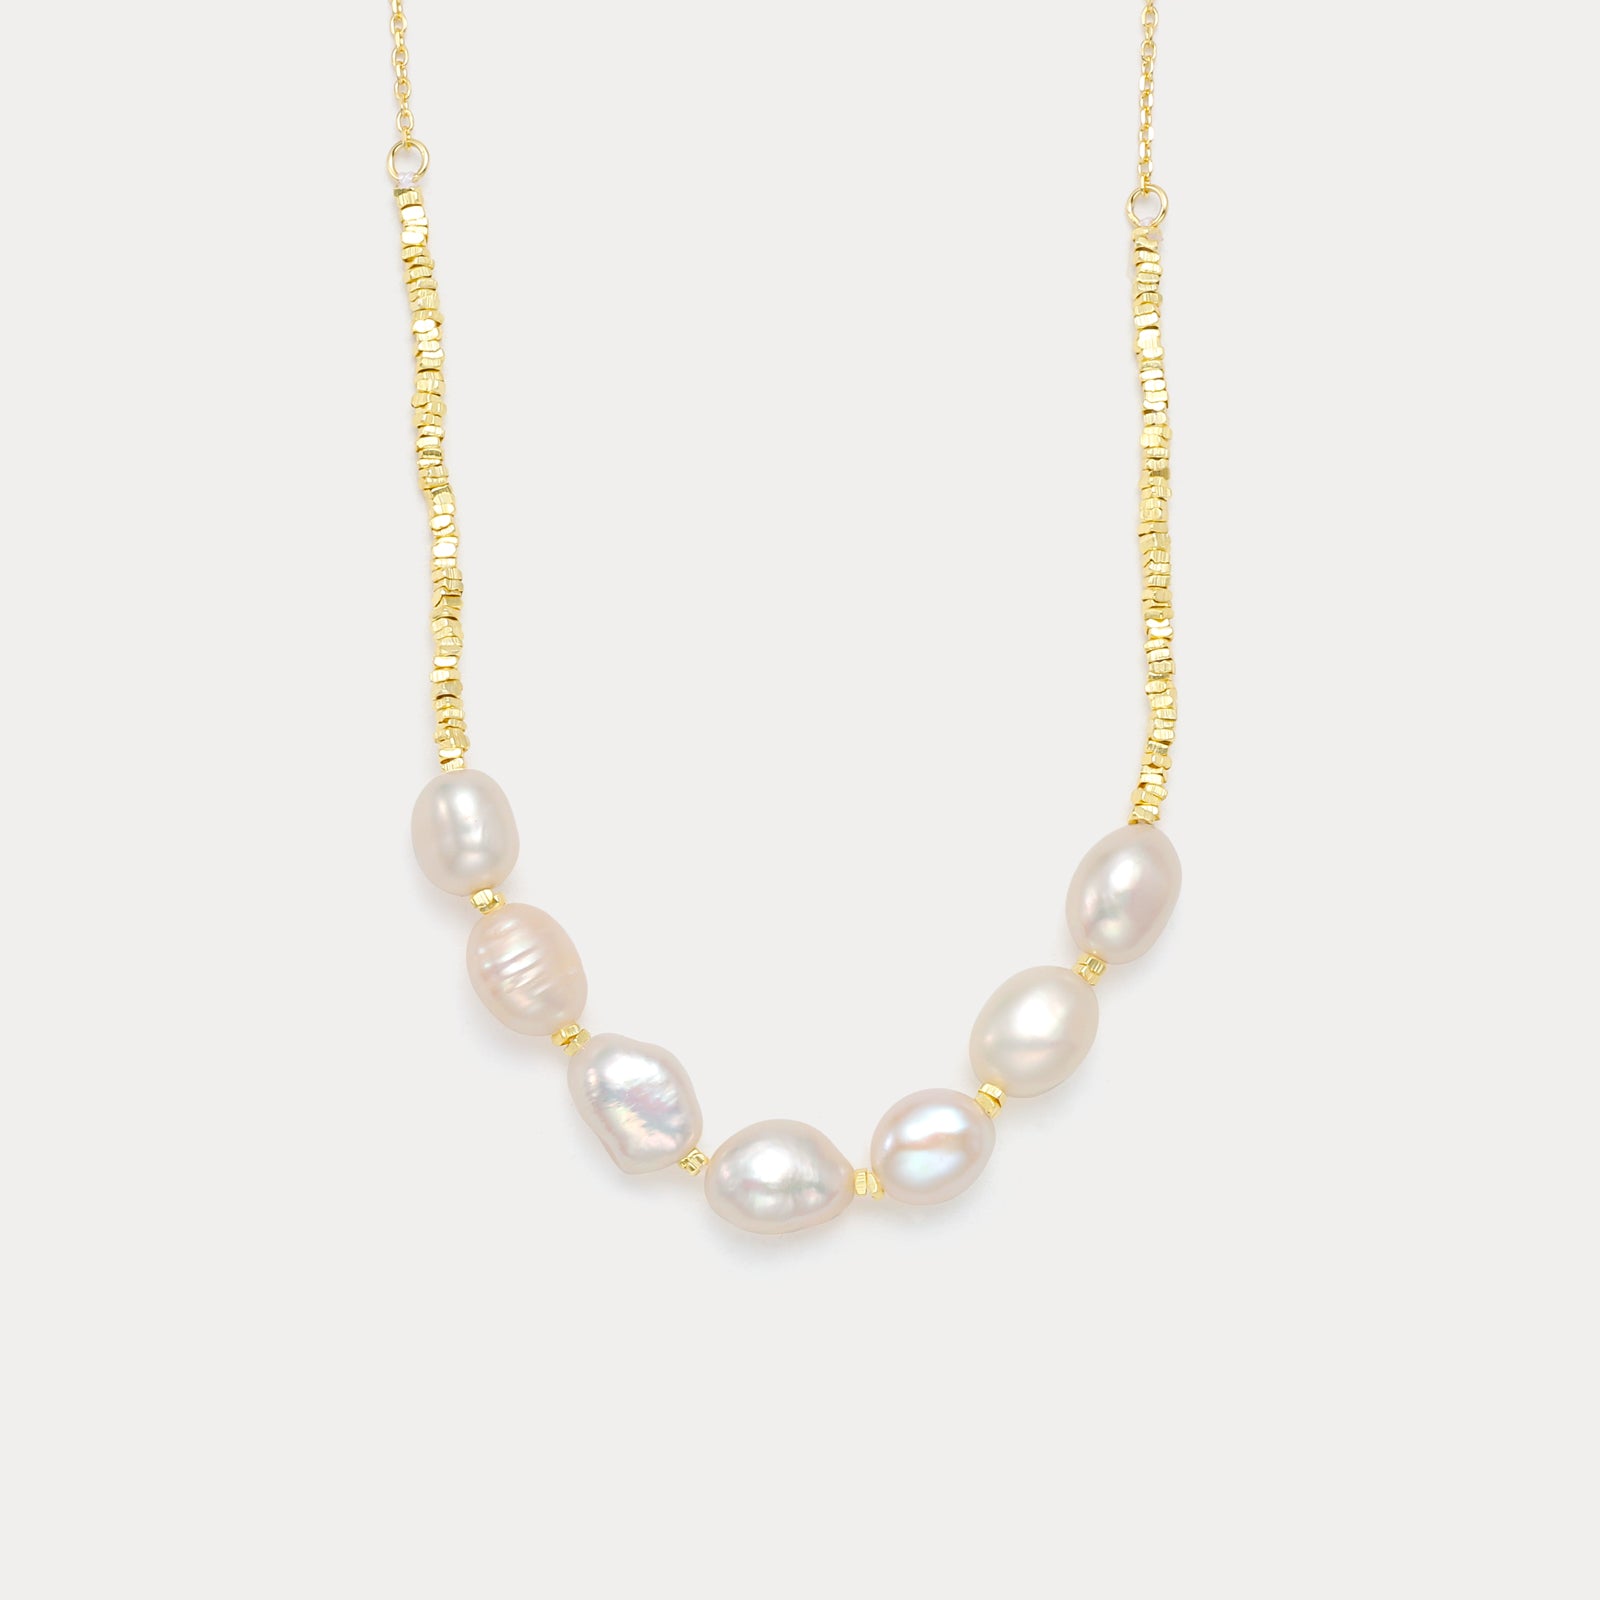 Selenichast Freshwater Pearl Necklace in 18k Gold Vermeil on Sterling Silver and Pearl